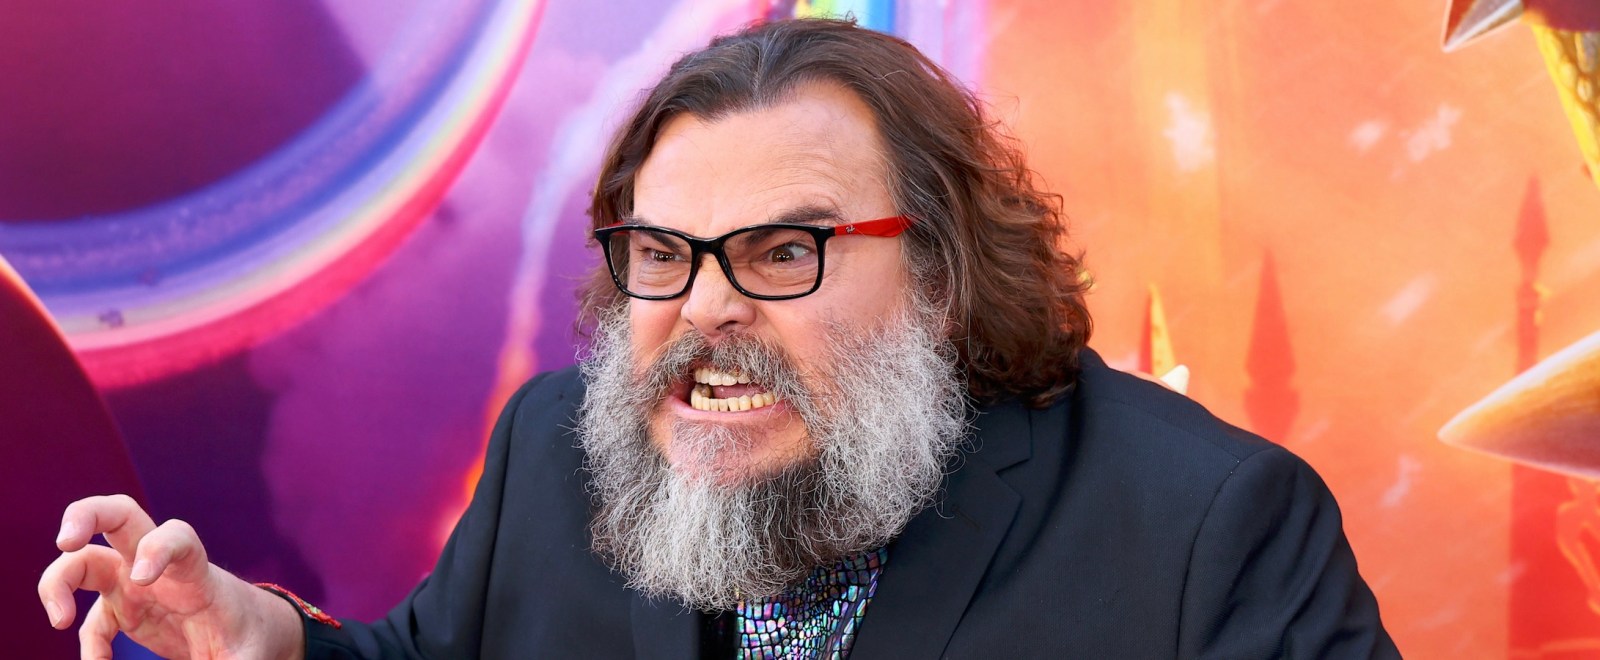 Jack Black Names The Movie Of His That He's Most Proud Of